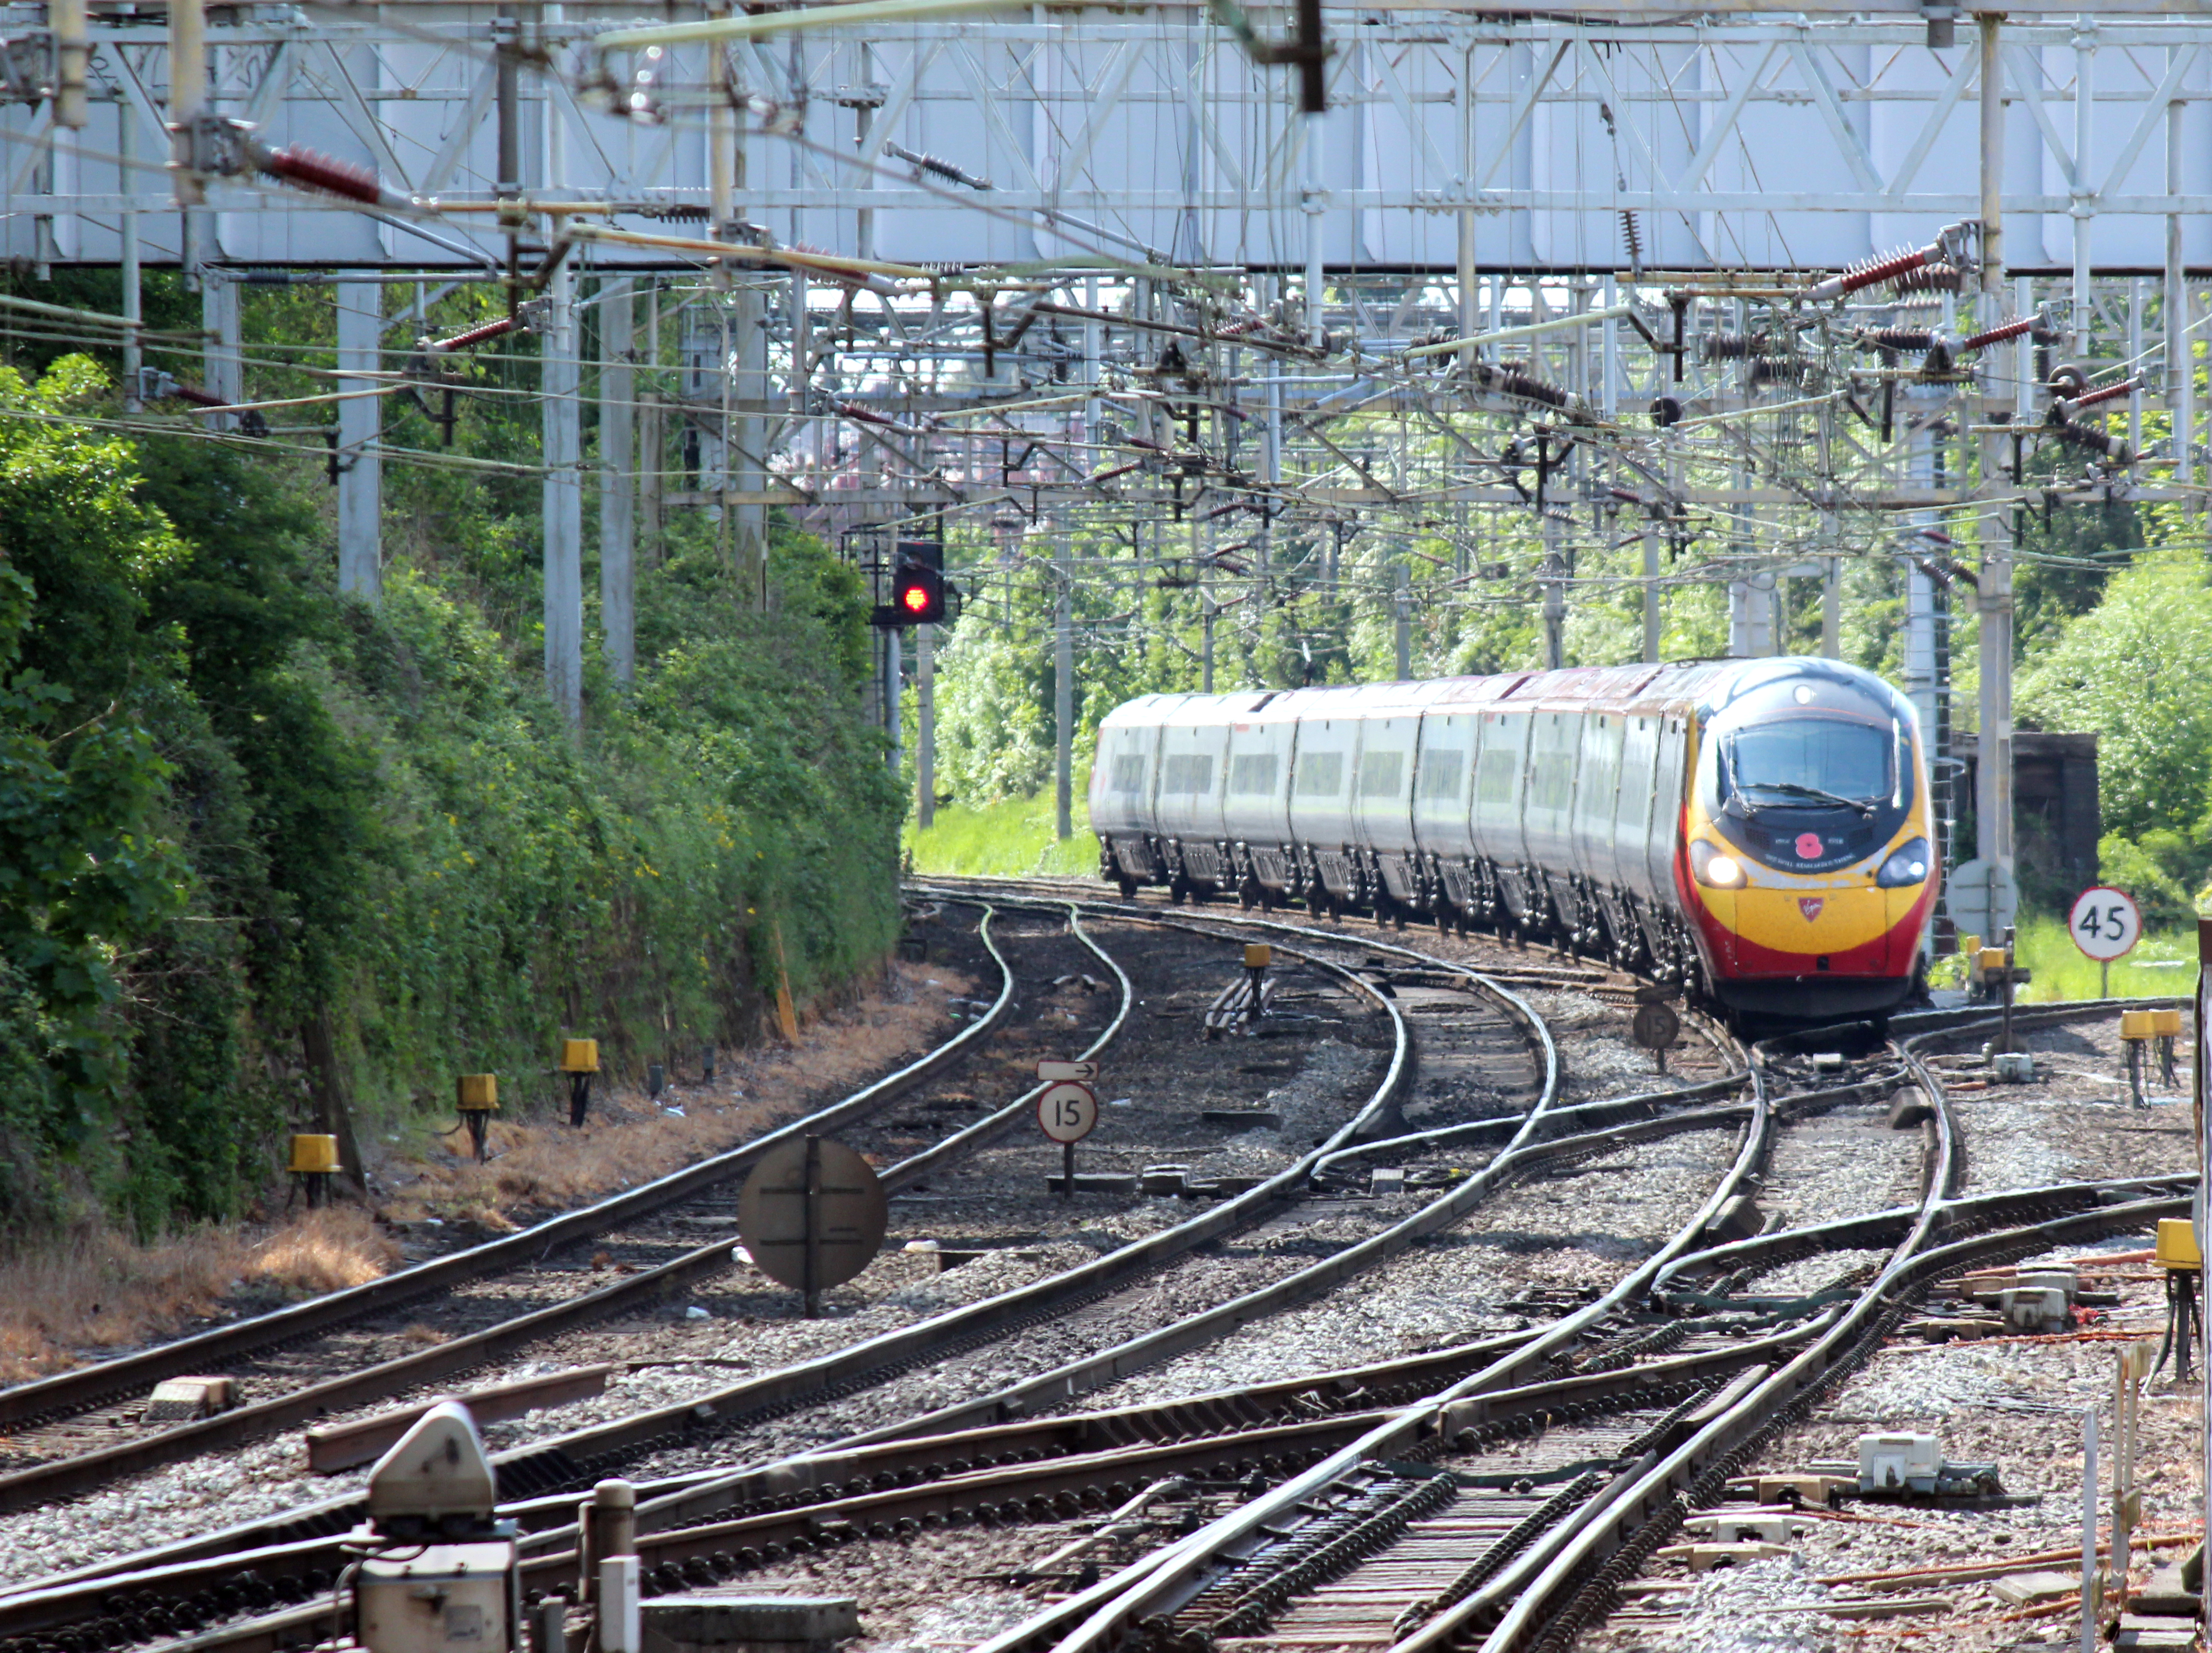 Virgin Pendalino approaching Coventry Station